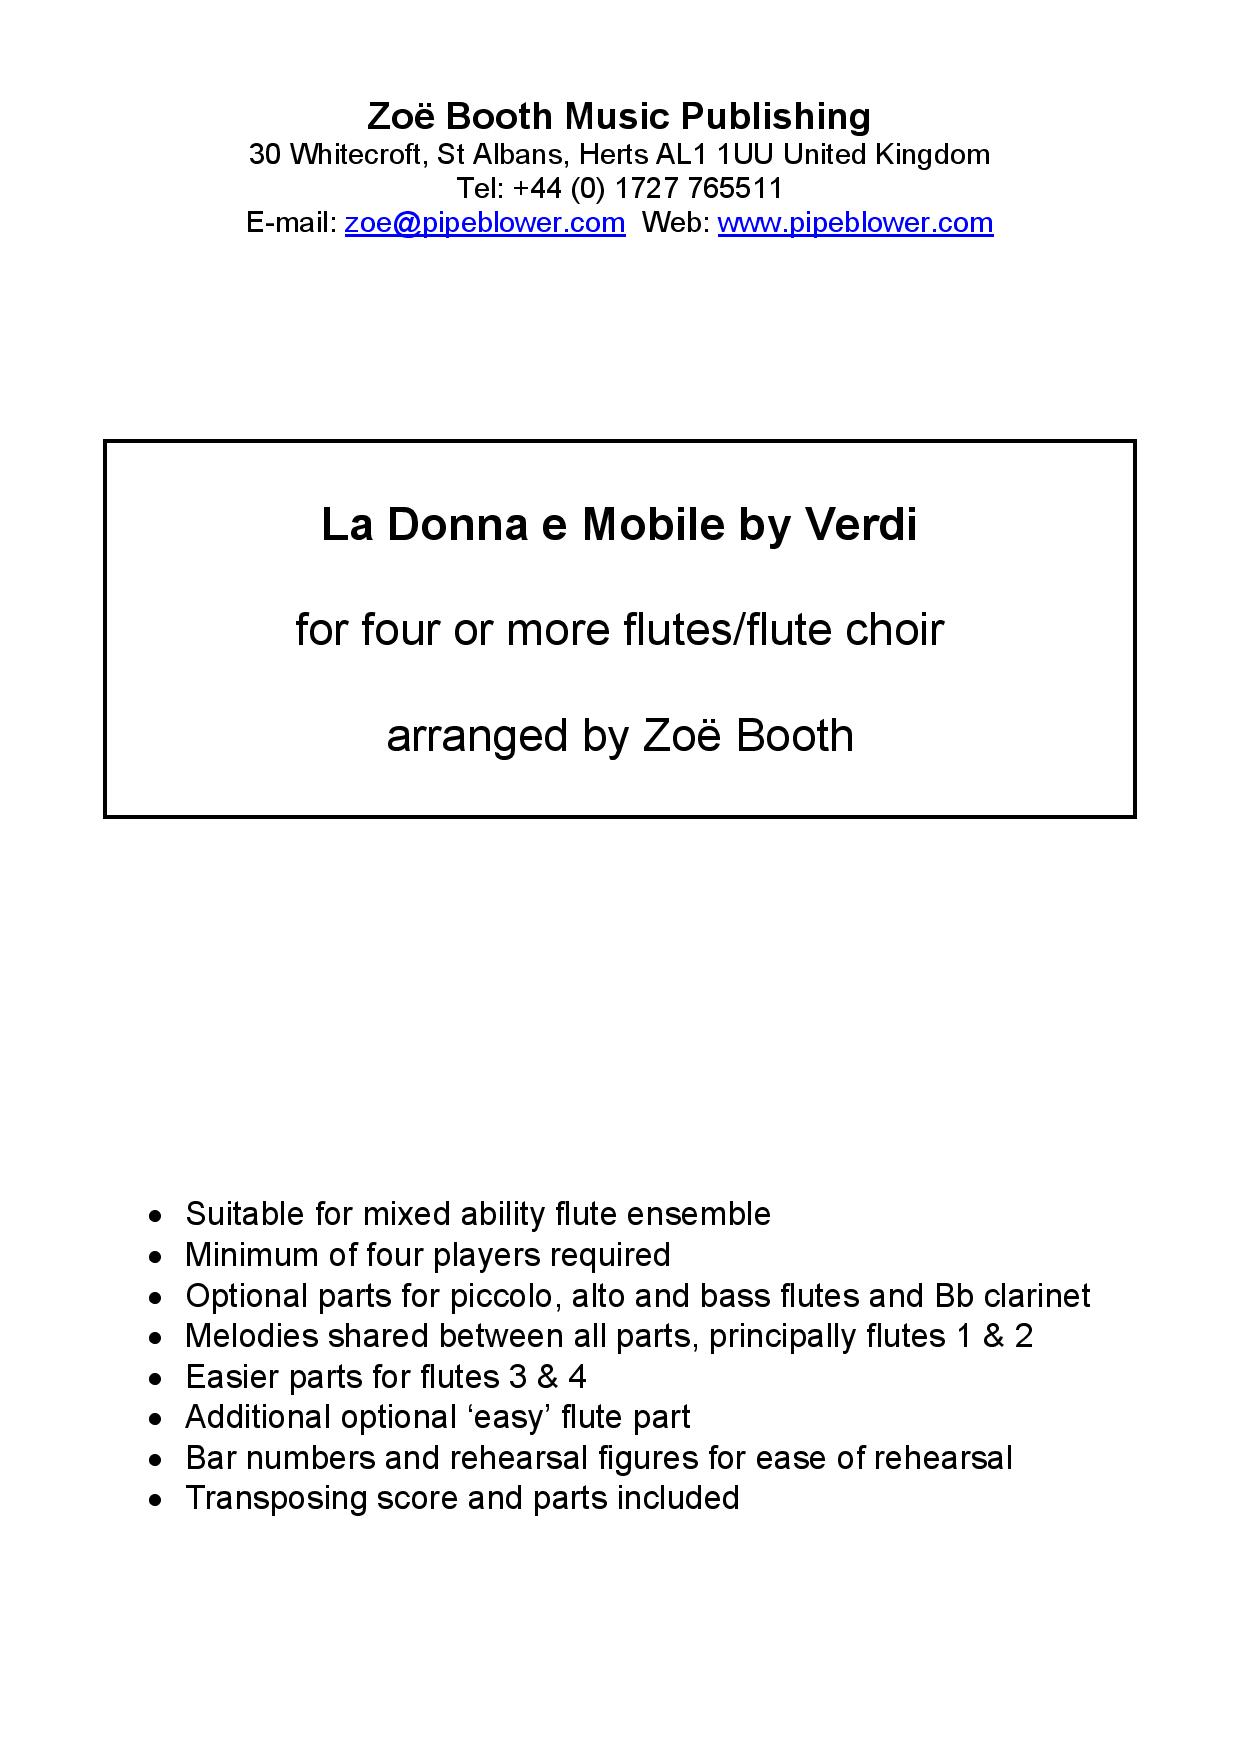 La Donna e Mobile from Rigoletto by Verdi,  arranged by Zoë Booth for four or more flutes/flute choi